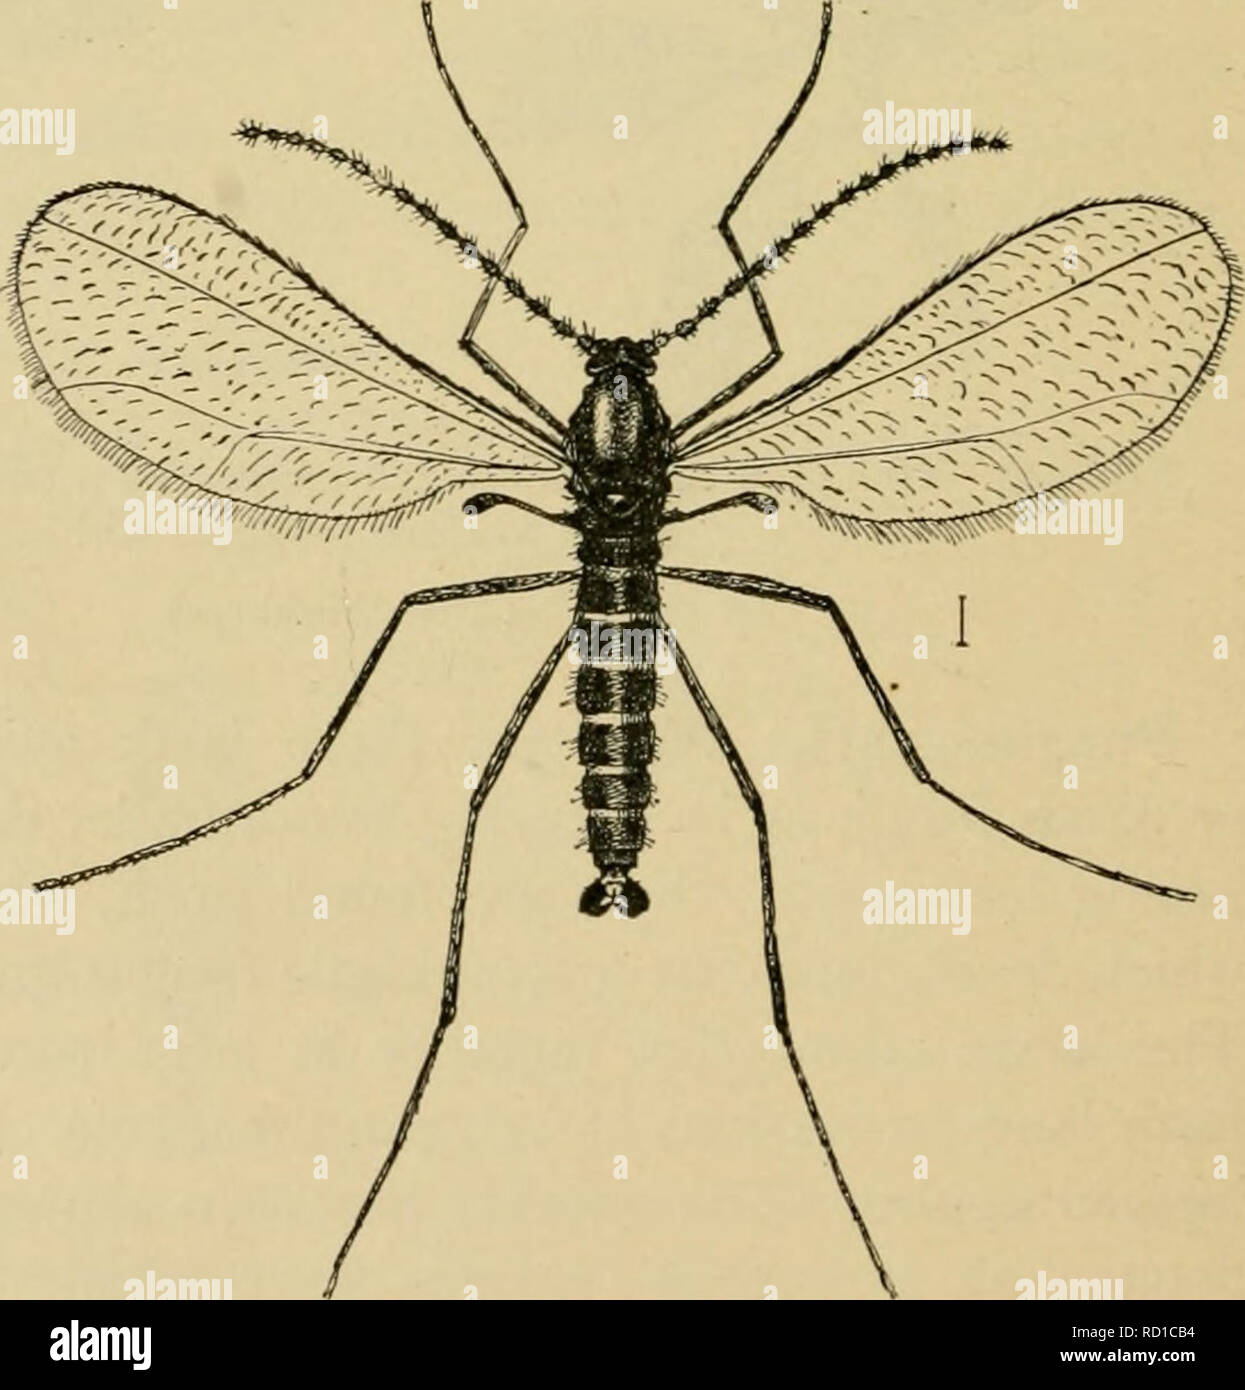 . Elementary entomology. Entomology. Fig. 359. Pear midge [Di- plosh pyrivora). (Enlarged) (After Riley) Gall-gnats. The smallest and most deli- cate of the gnatlike flies are the gall-gnats {Cecidomyiidae). The adults are rarely over one eighth of an inch long, with long antennae clothed with short hairs, and with the wing-veins greatly reduced in number. They will be rarely noticed by the begin- ner, but the work of the larv^ is often much in evidence, owing to their feeding within the stems and leaves of plants and giving rise to galls. Frequently a green, cone-shaped gall is found on the t Stock Photo